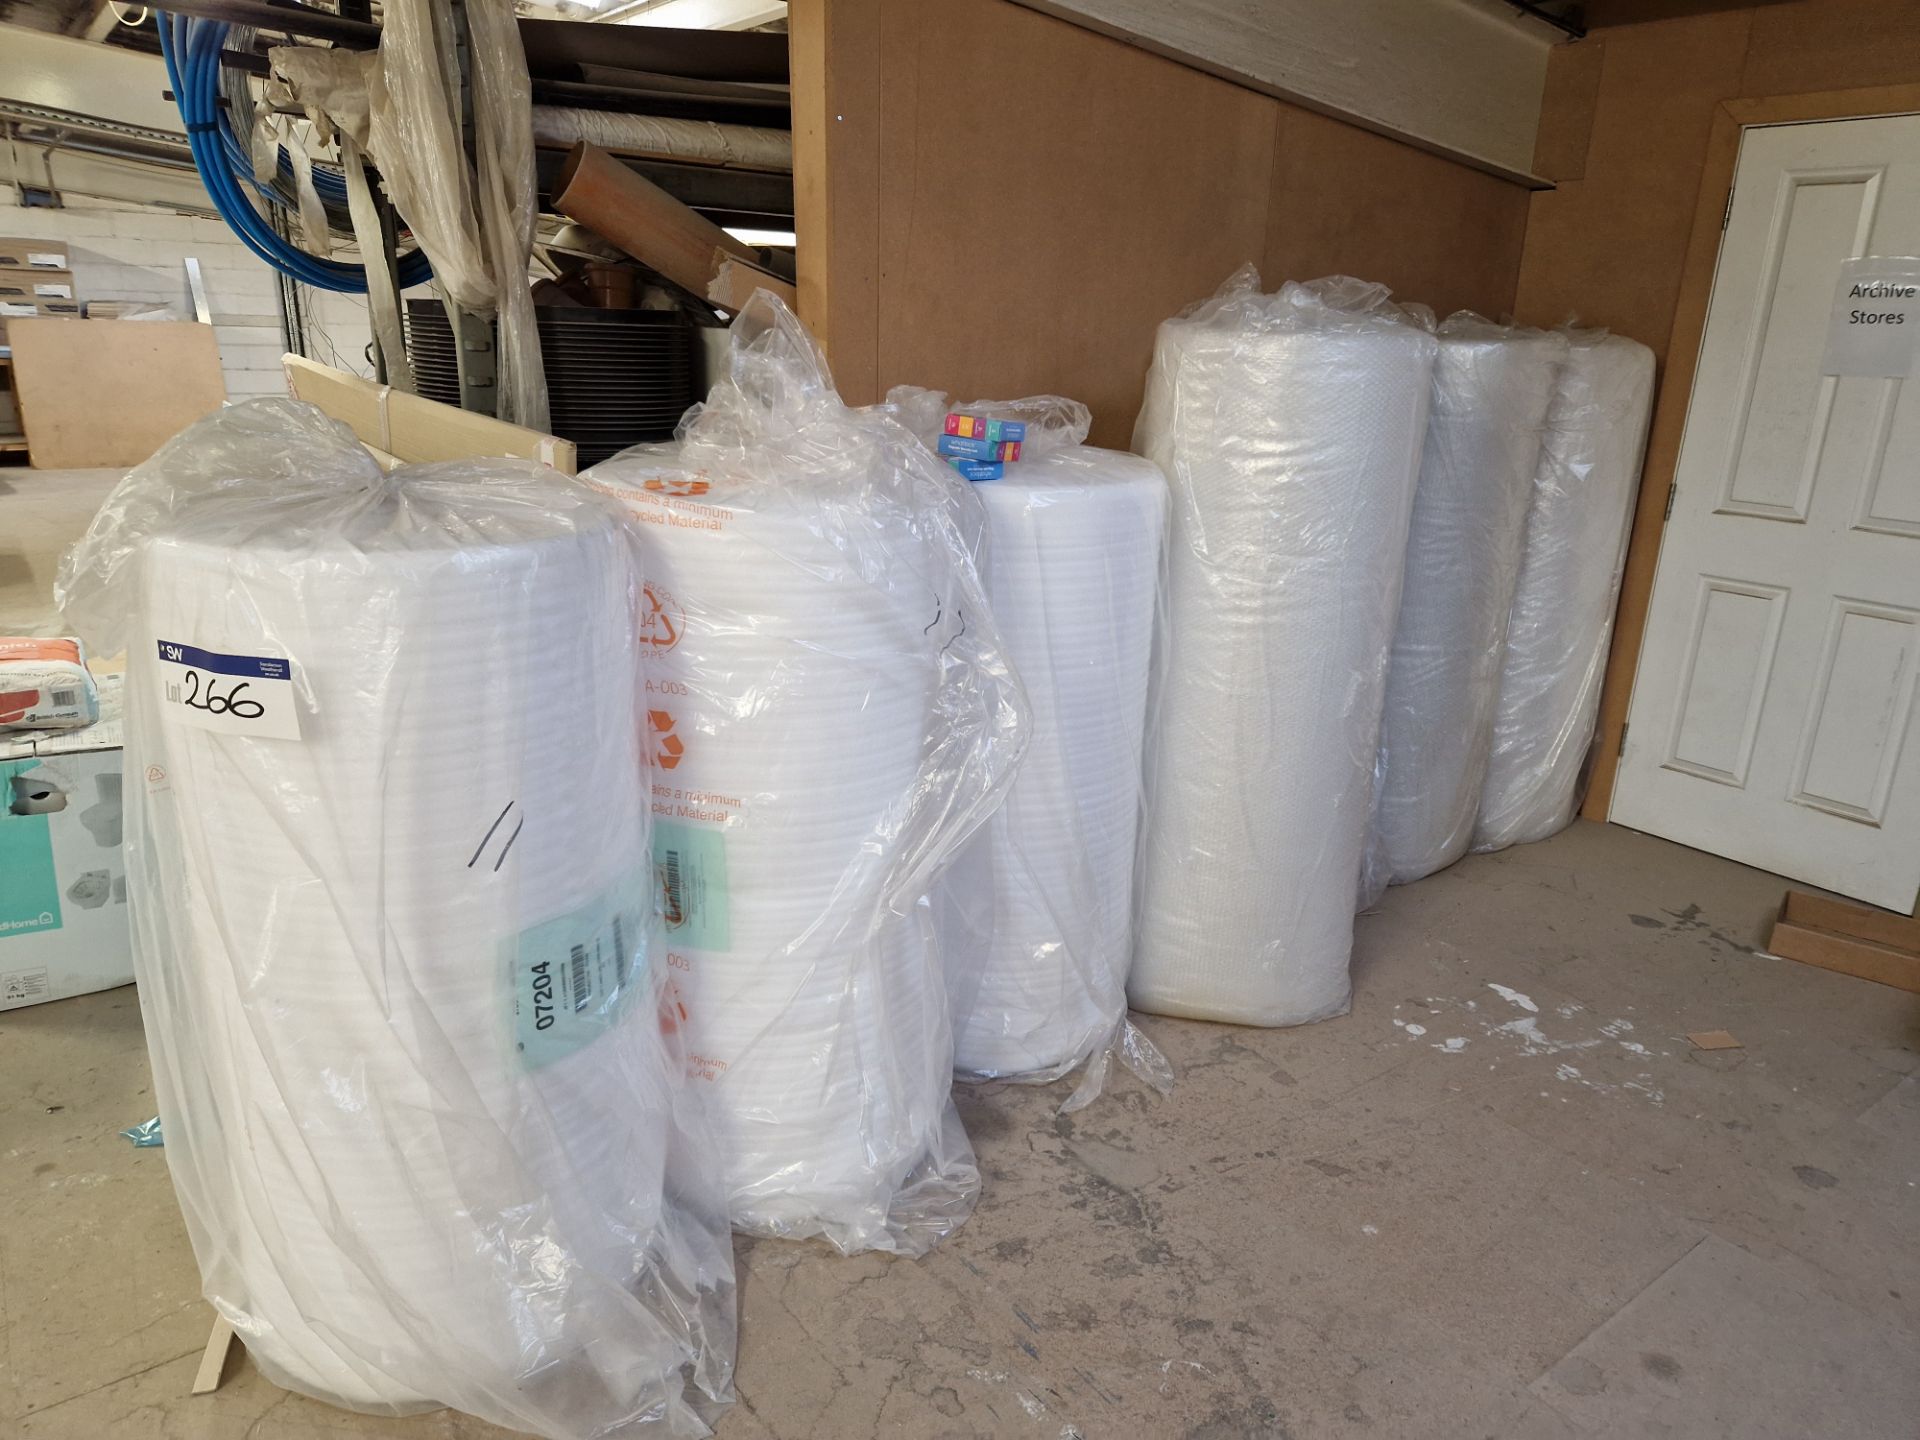 Three Rolls of 1200mm x 300mm Foam Packing Material and Four Rolls of BubblewrapPlease read the